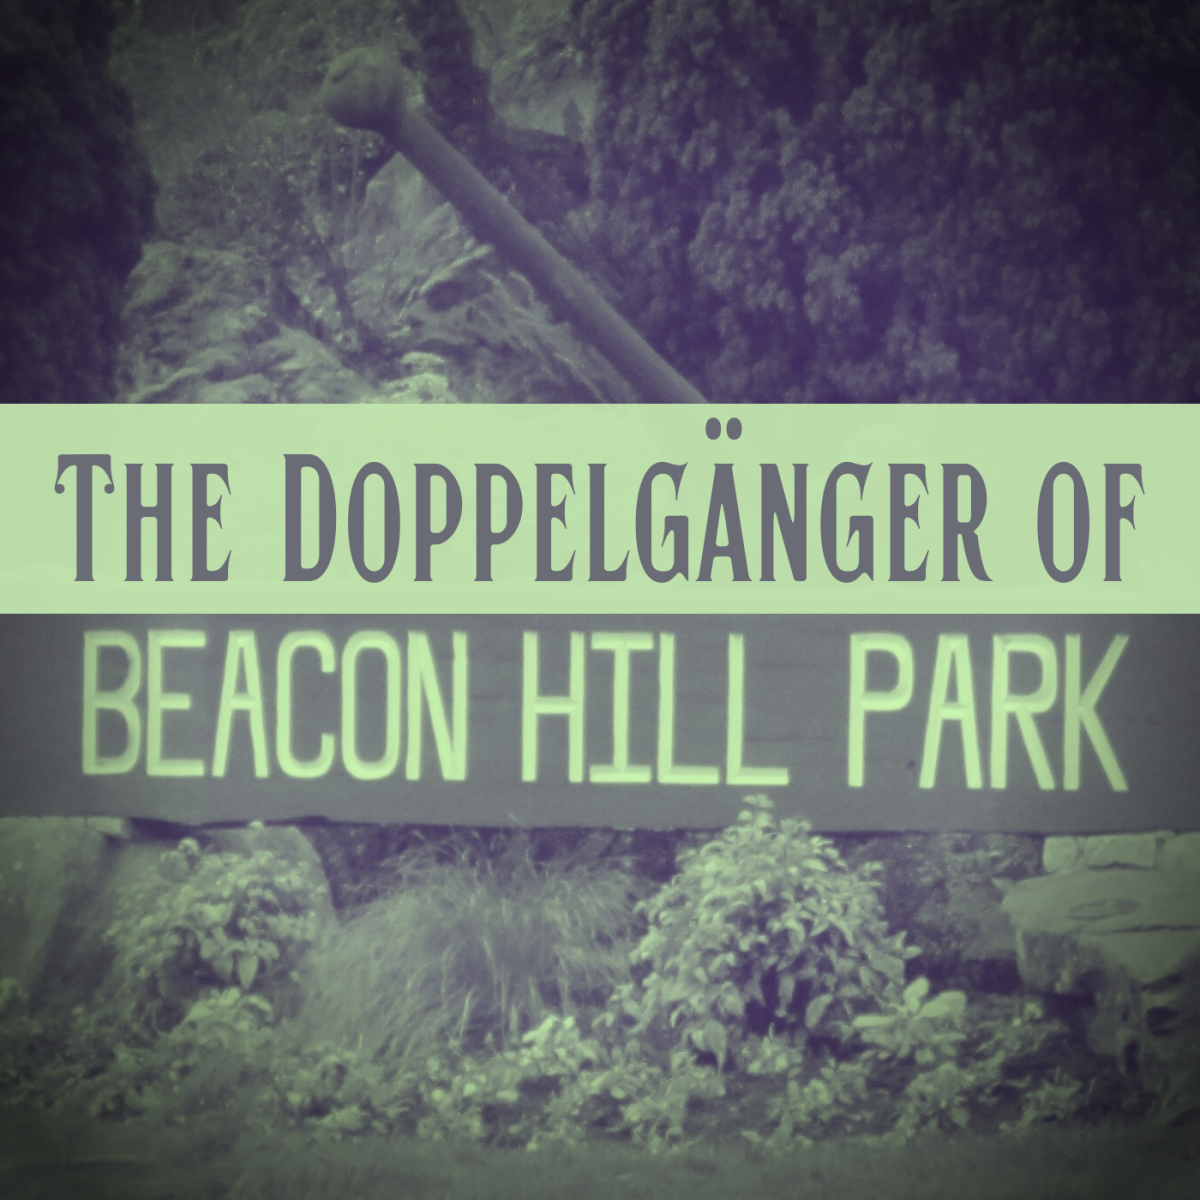 Learn the story of Donna Mitchell, who was murdered and buried in Beacon Hill Park years after a mysterious woman who resembled Mitchell was spotted there.